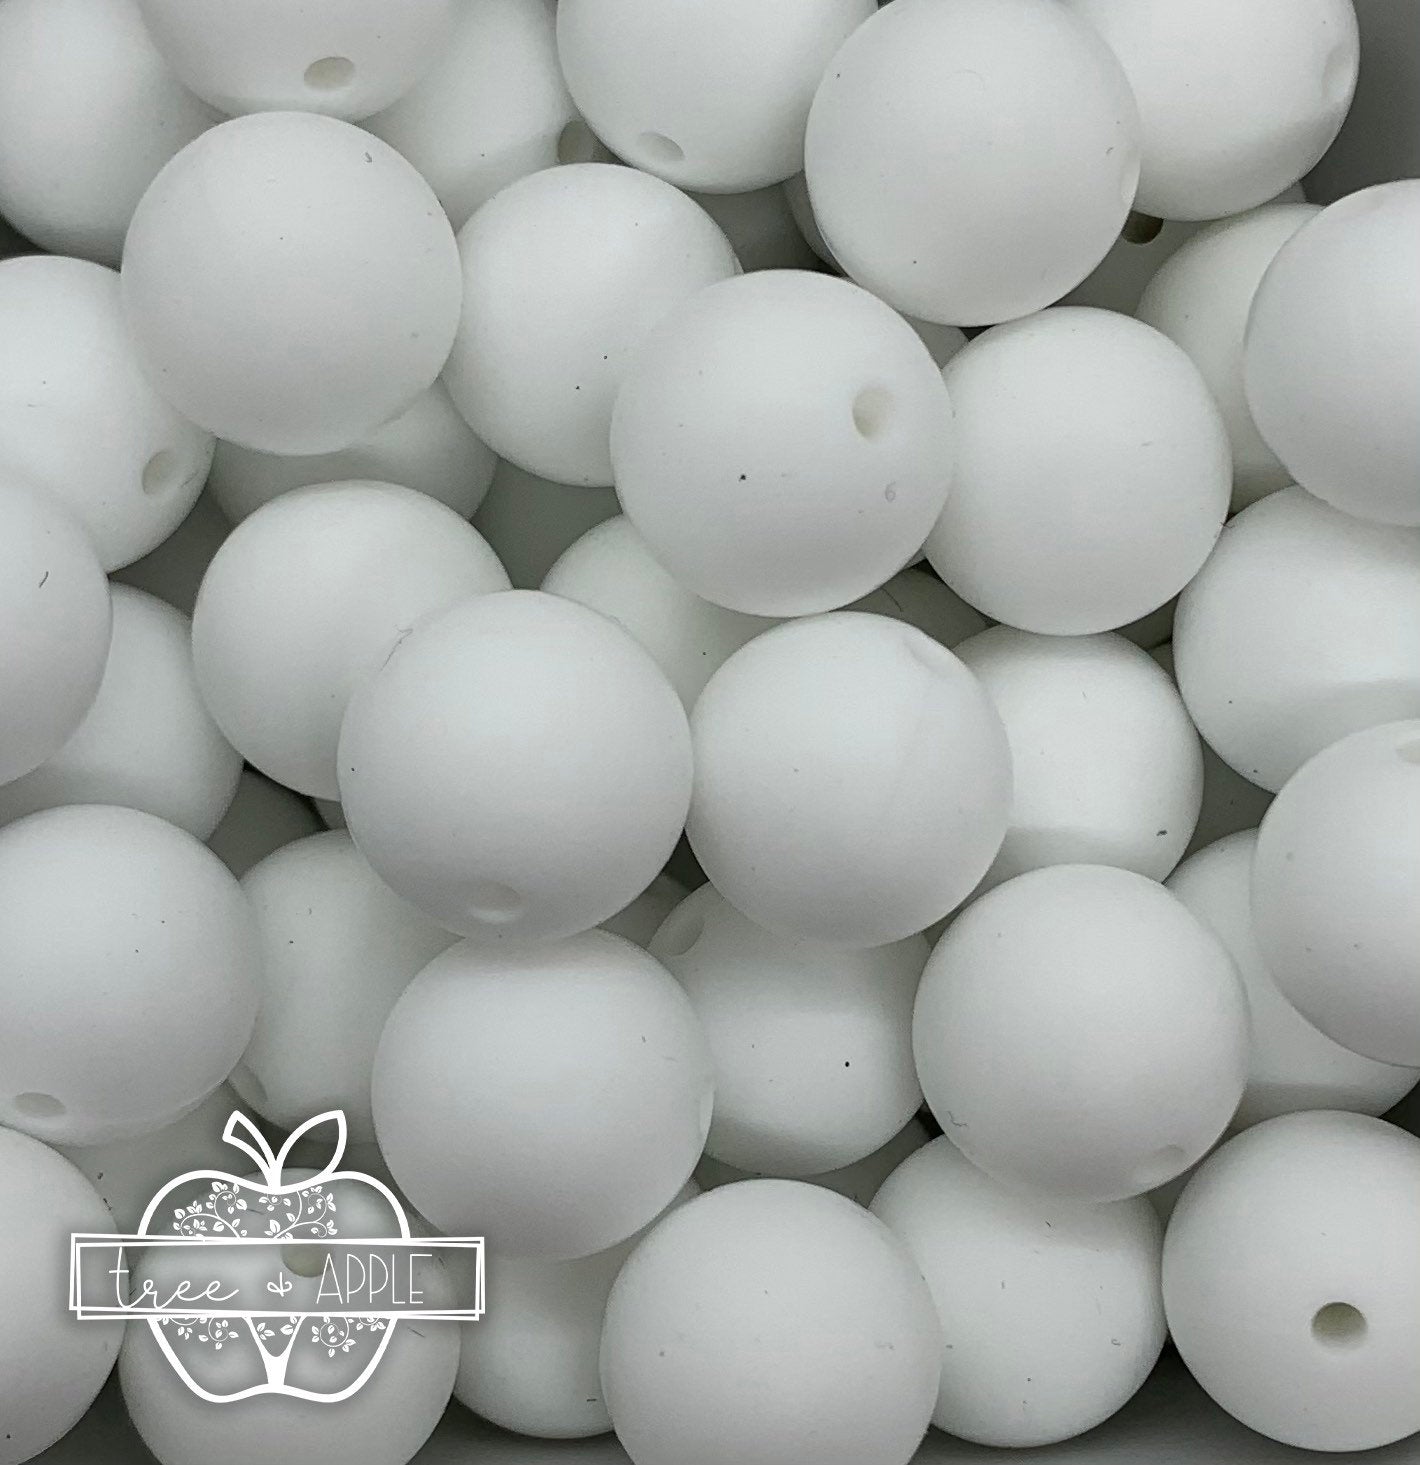 15mm White Silicone Beads, White Round Silicone Beads, Beads